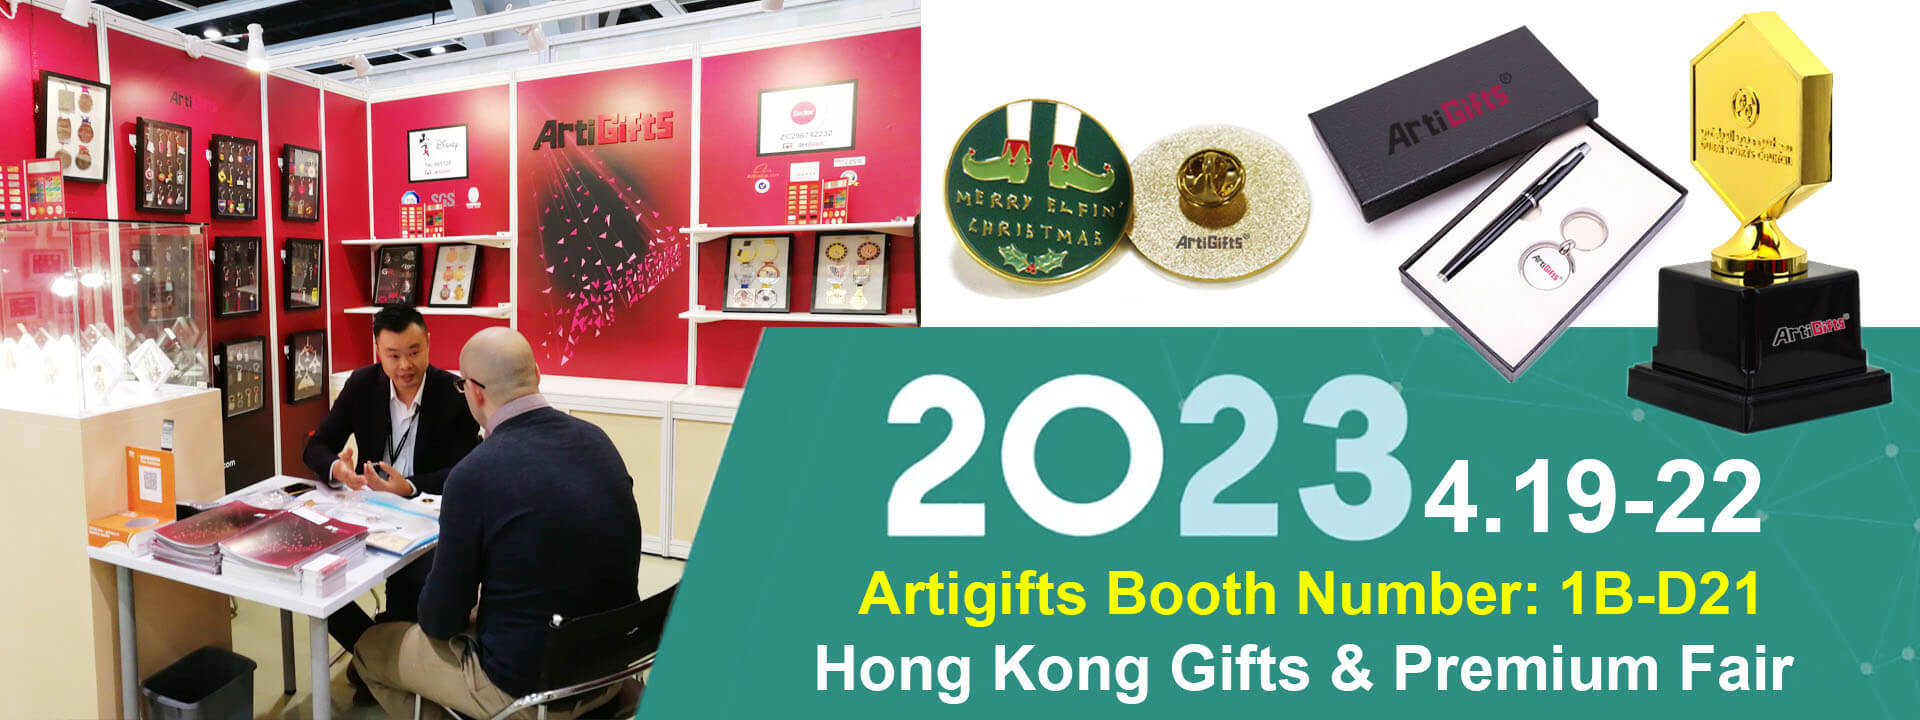 Join us at the Hong Kong Trade Show and Discover Our Latest Gift Collections